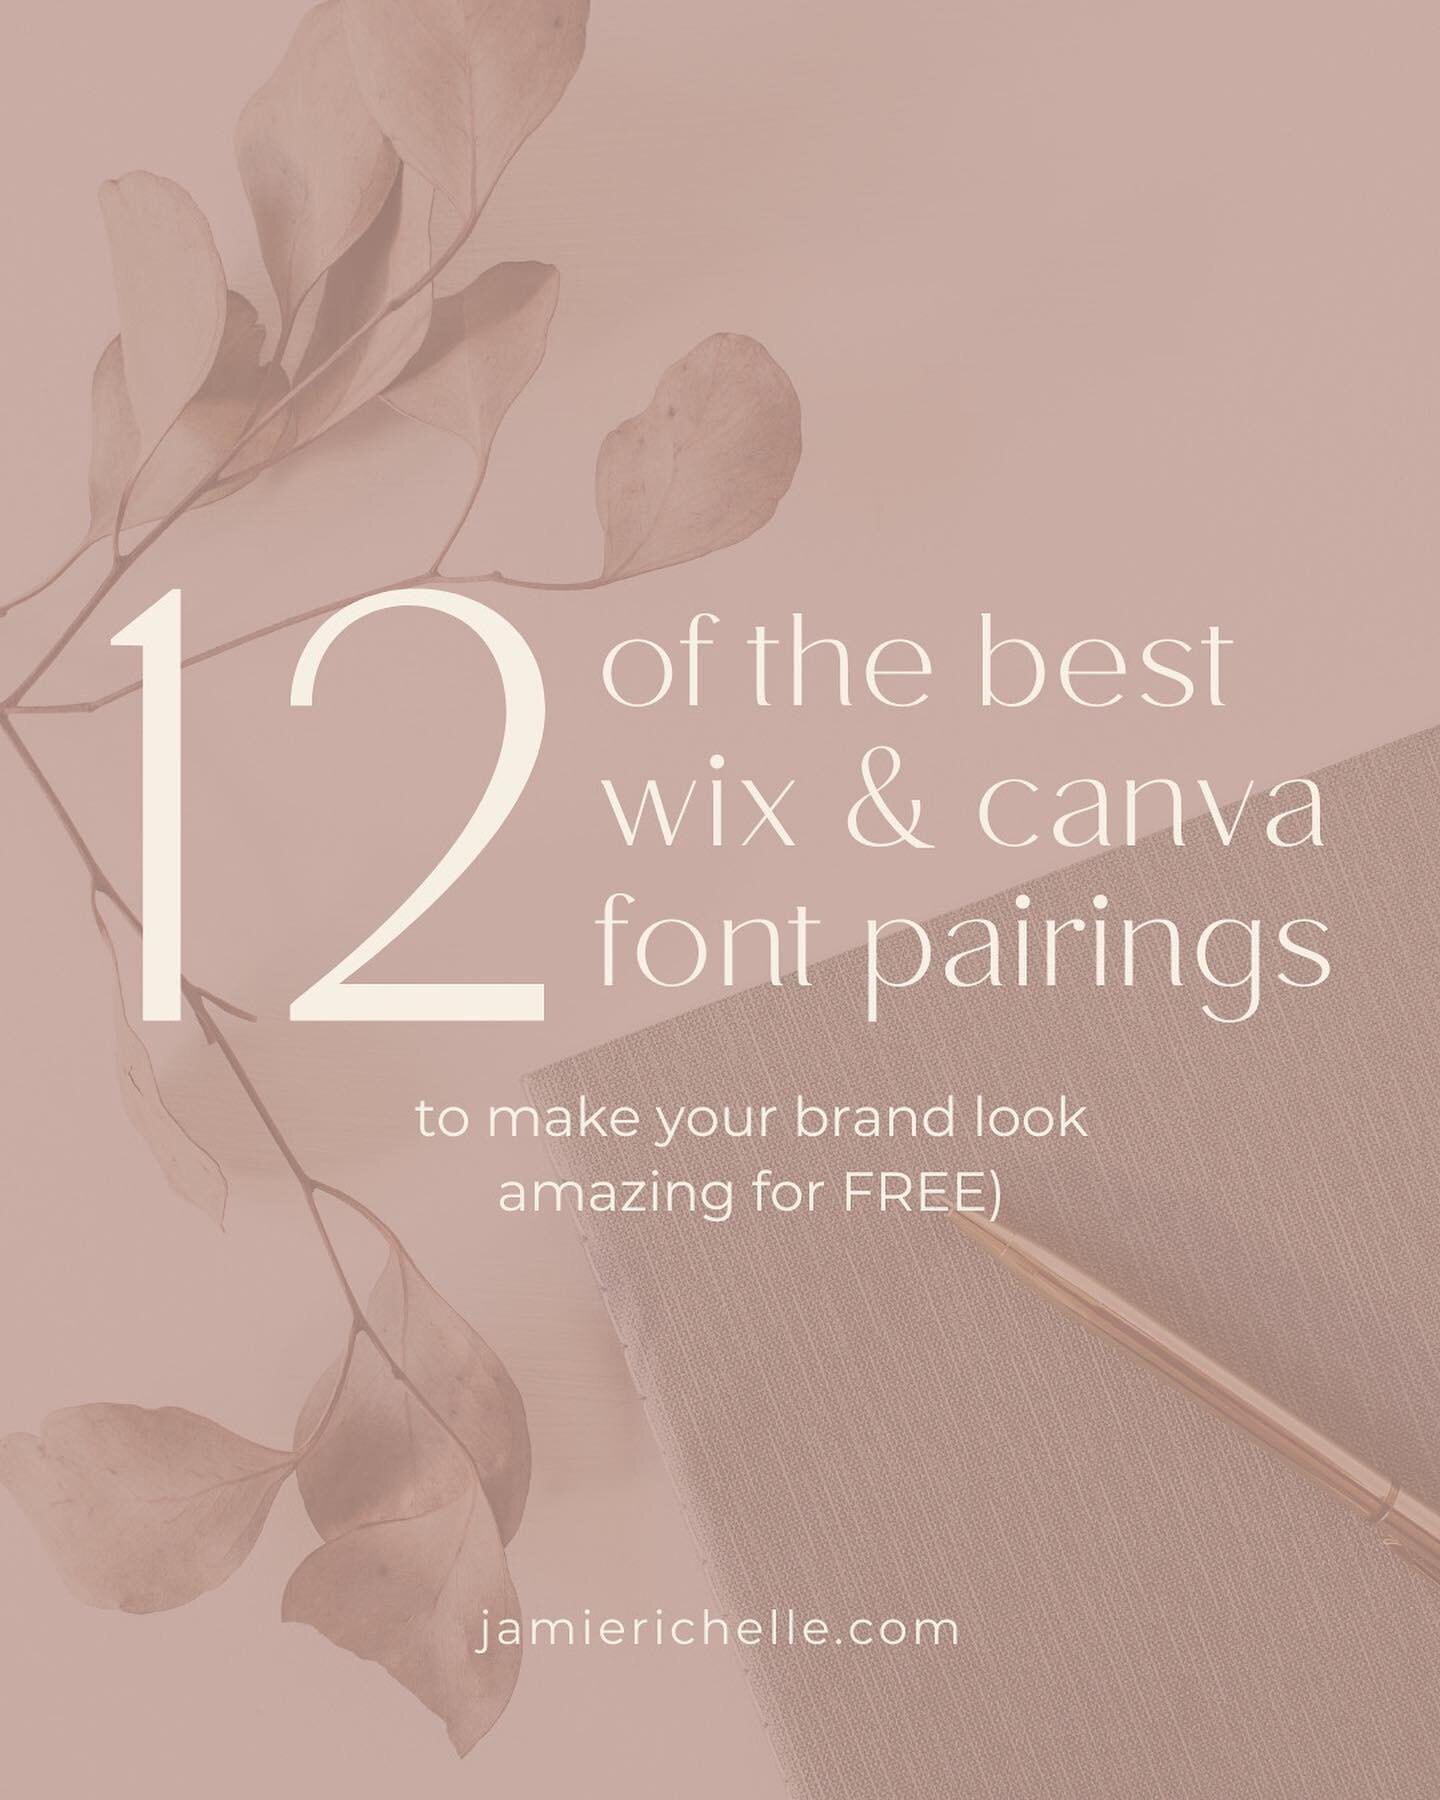 It is super easy to upload your own fonts to Wix, but if you&rsquo;re looking for an easy peasy quick way to get your website up, here&rsquo;s some of my favorite font pairings already in Wix.
⠀⠀⠀⠀⠀⠀⠀⠀⠀
Looking for more? Check out the blog via the li